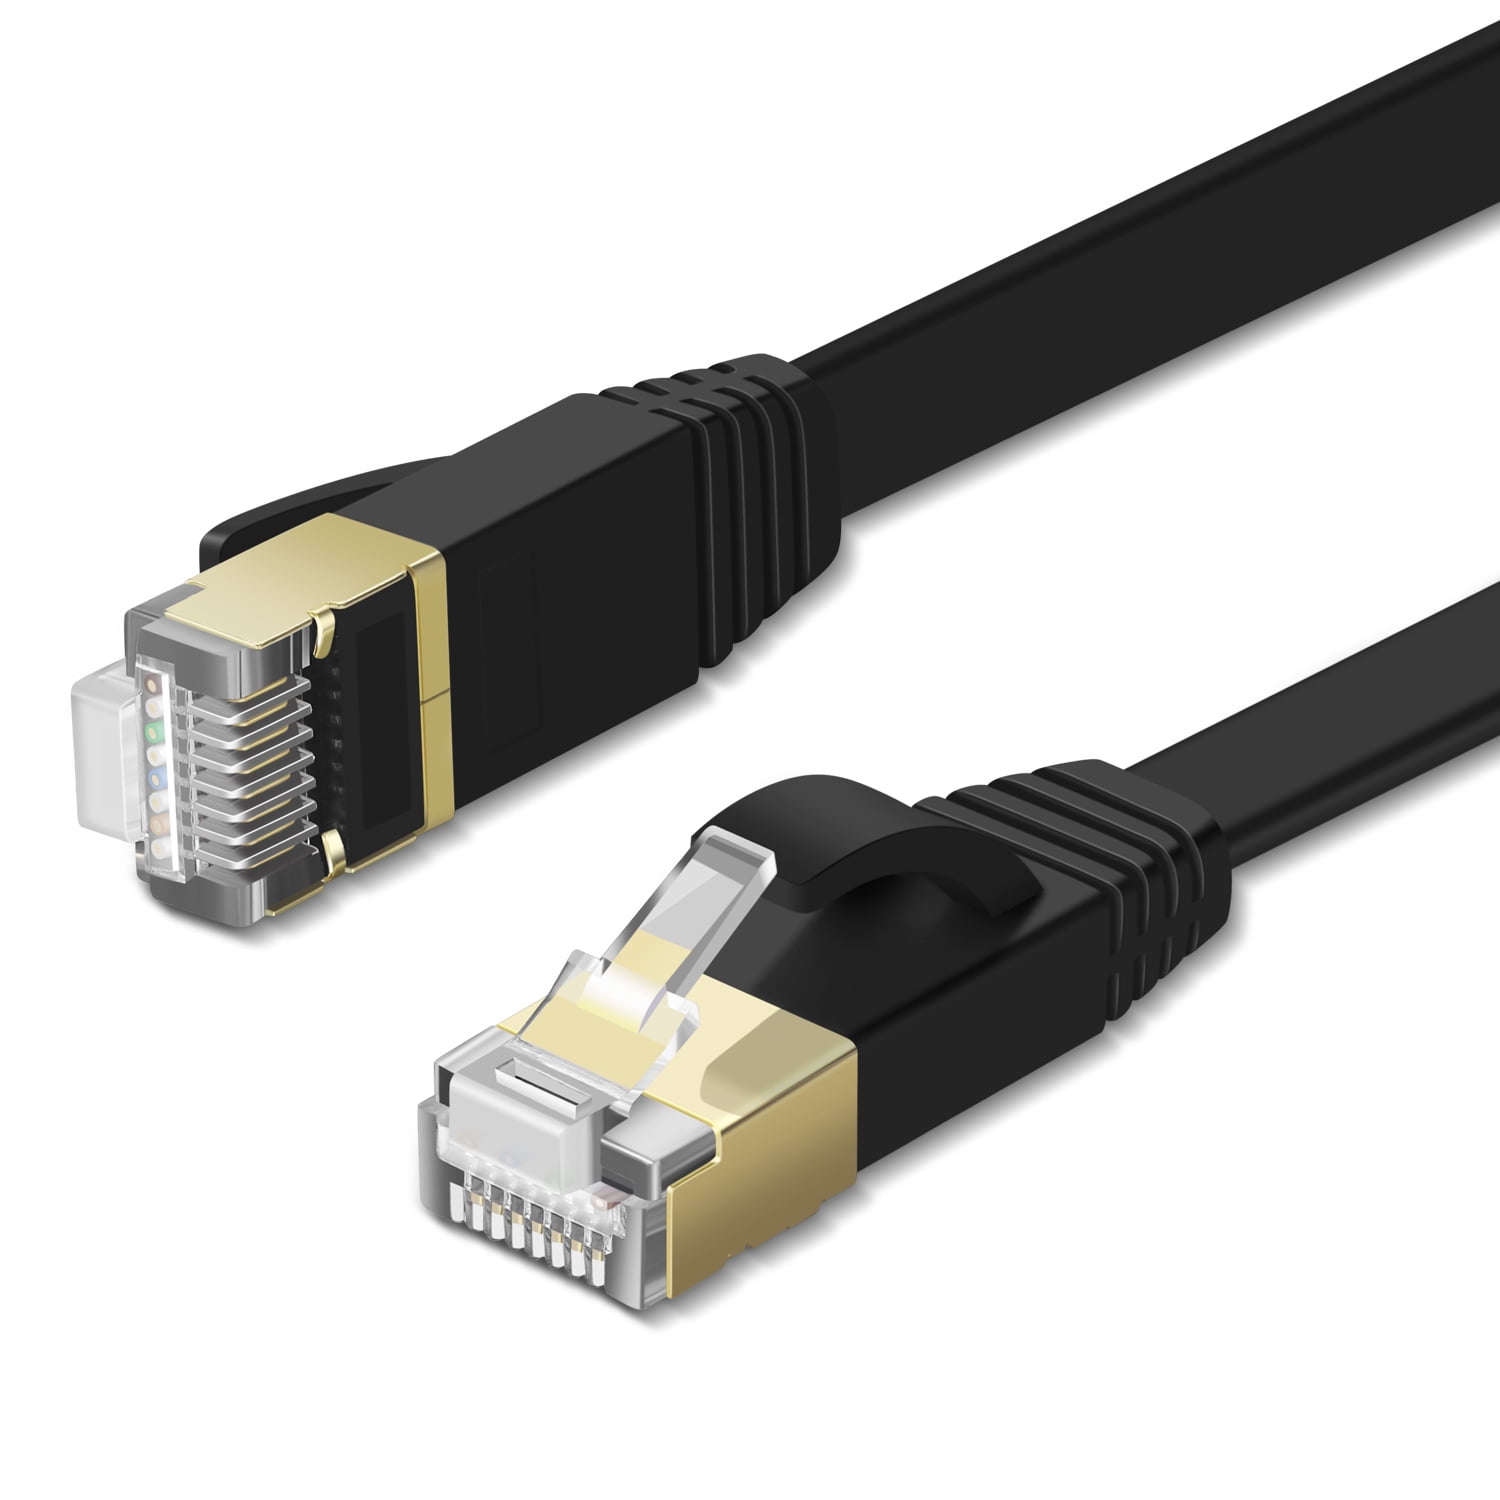 Quick Connect CAT7 Gold Plated Dual Shielded Full Copper LAN Network Cable 3m. Length 